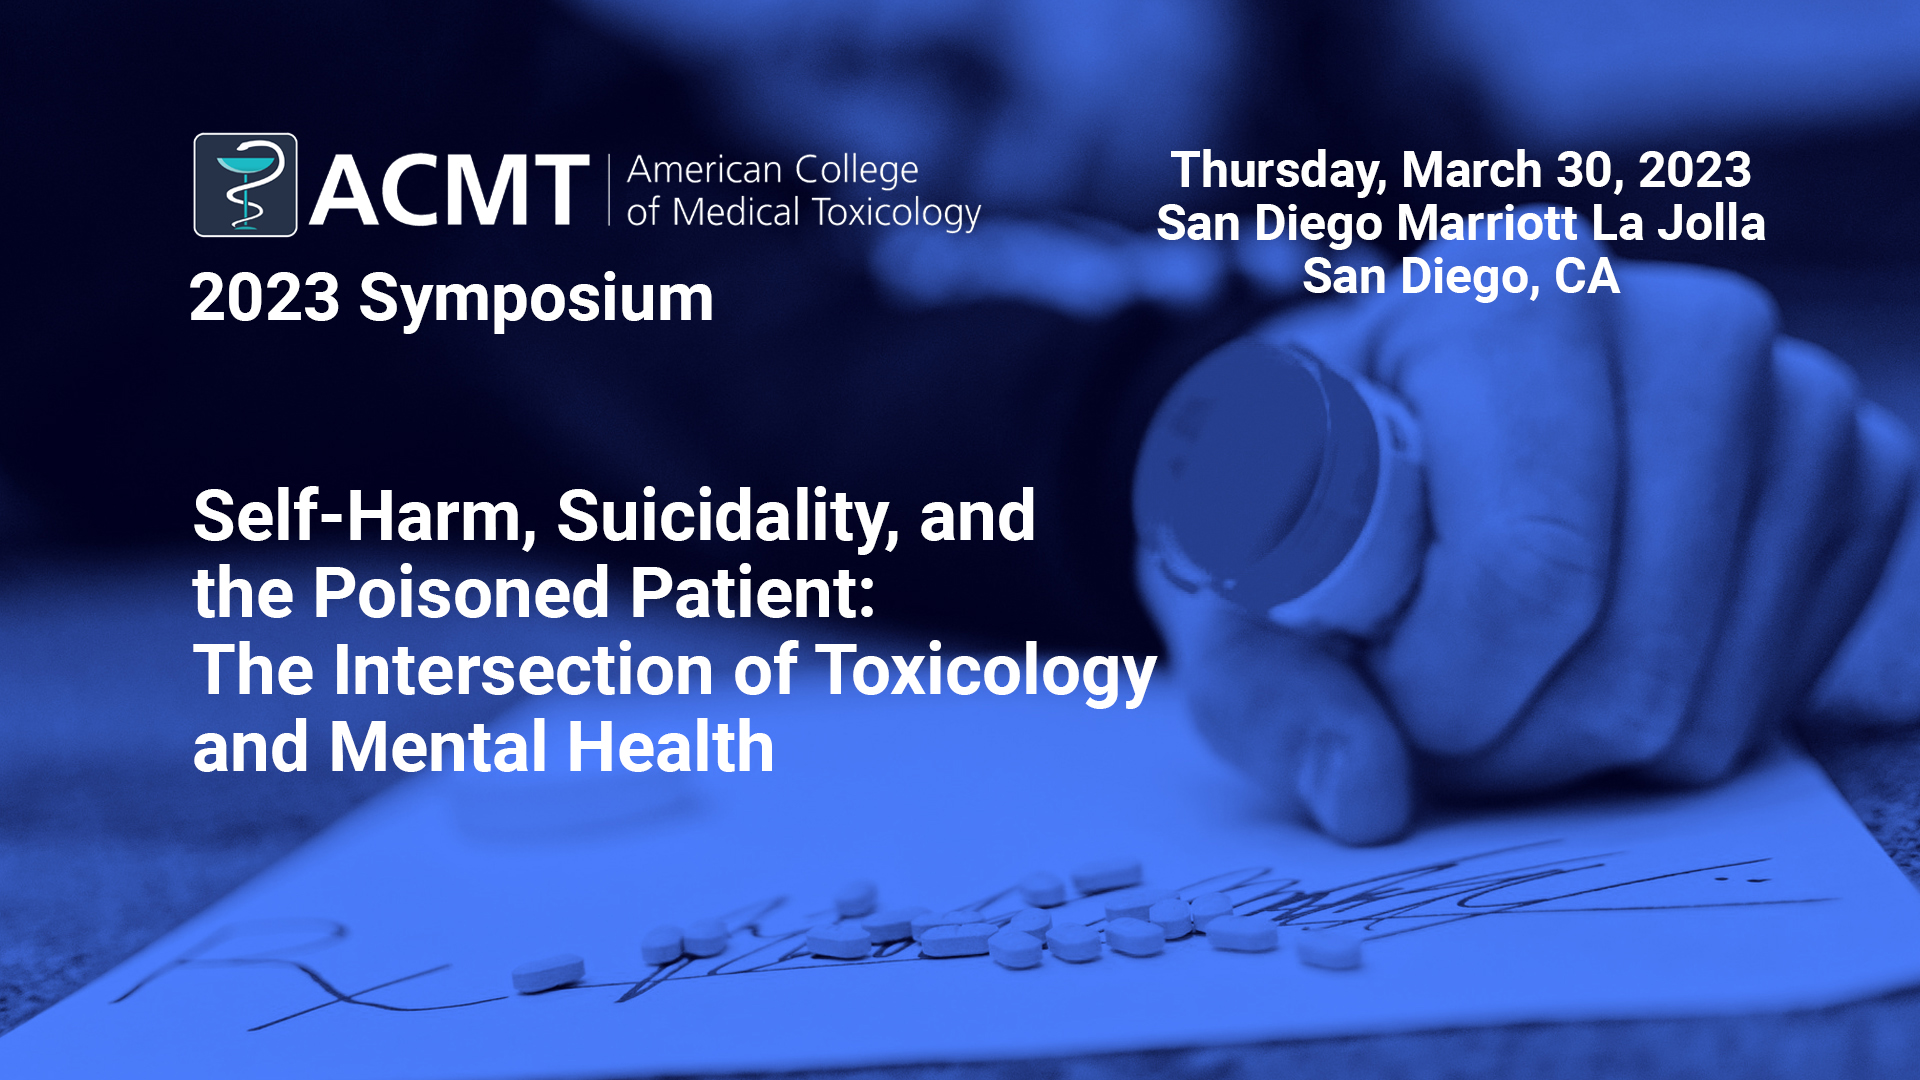 2023 ACMT Symposium | Self-Harm, Suicidality, and the Poisoned Patient: The Intersection of Toxicology and Mental Health